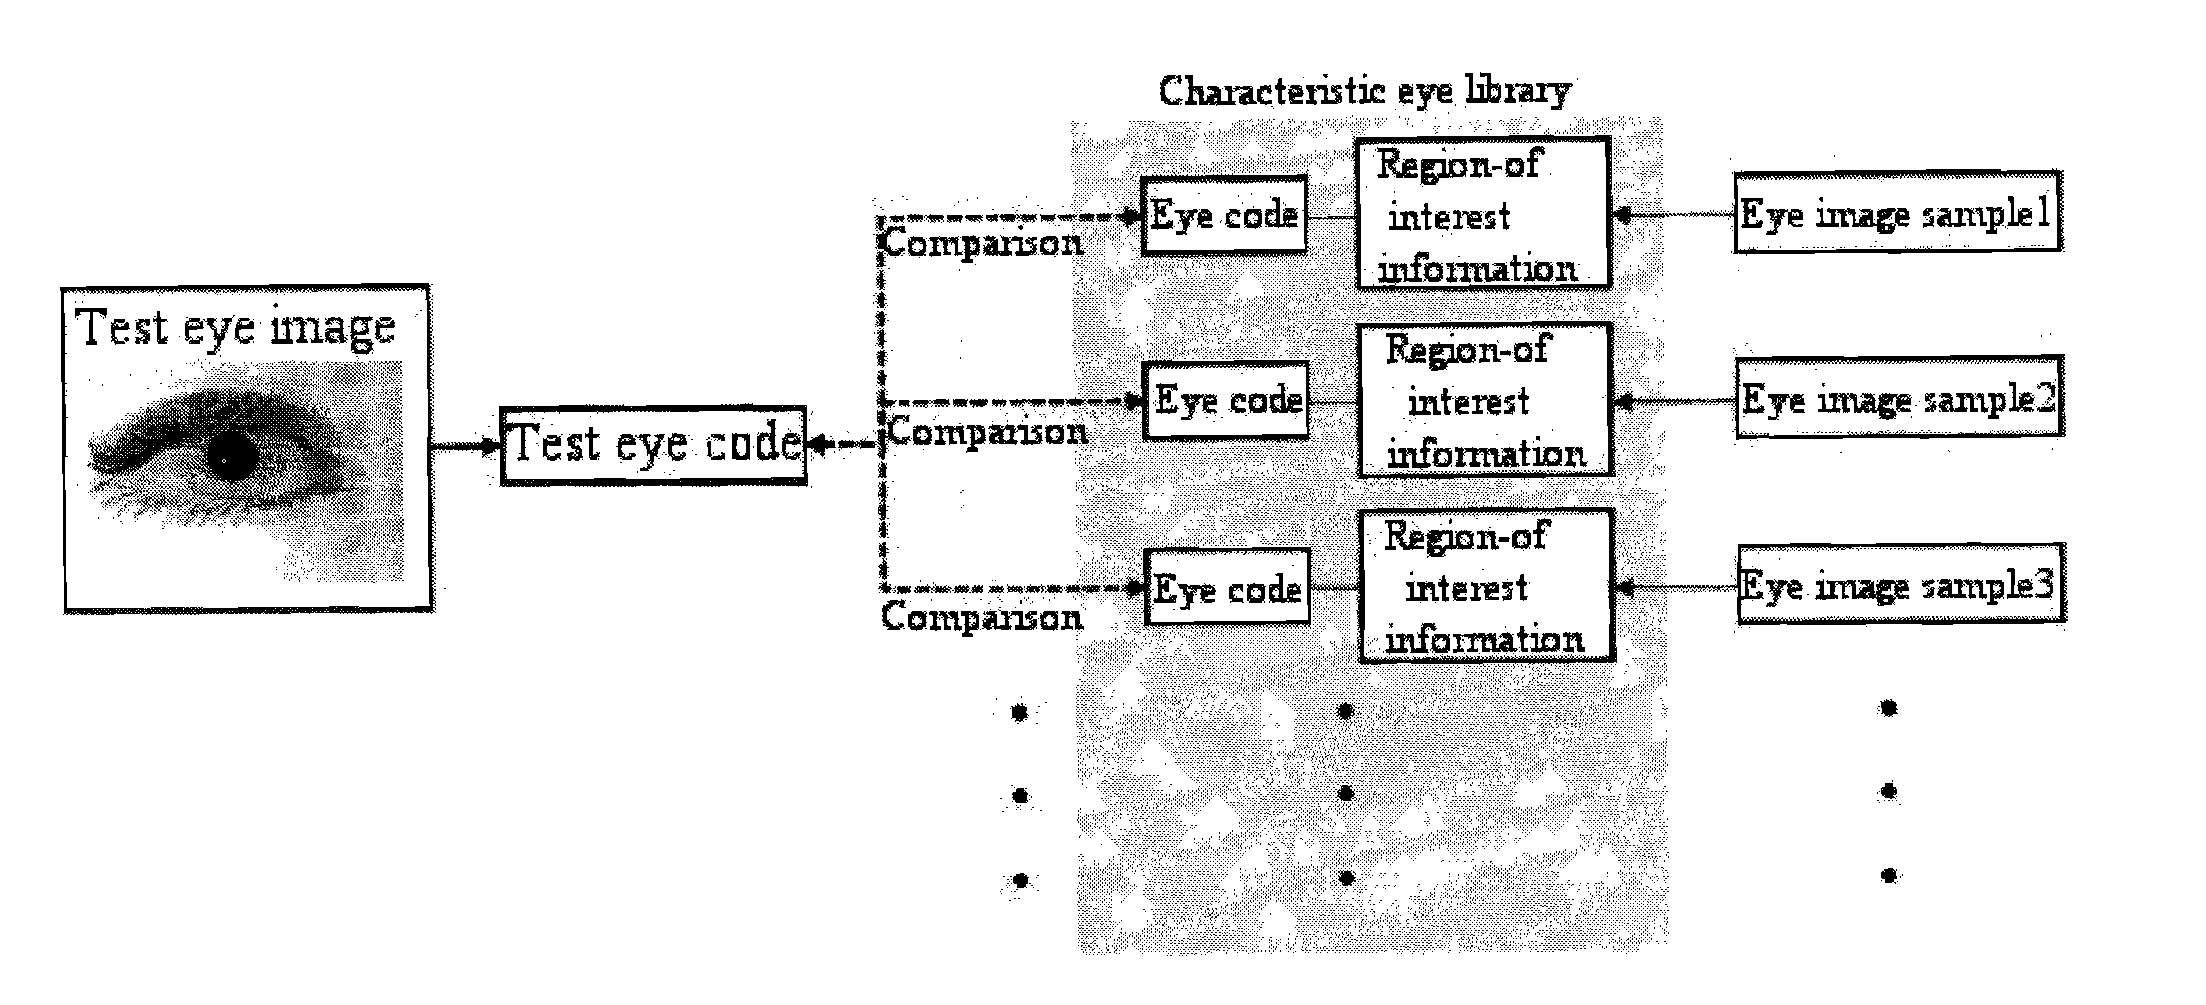 Method for acquiring region-of-interest and/or cognitive information from eye image